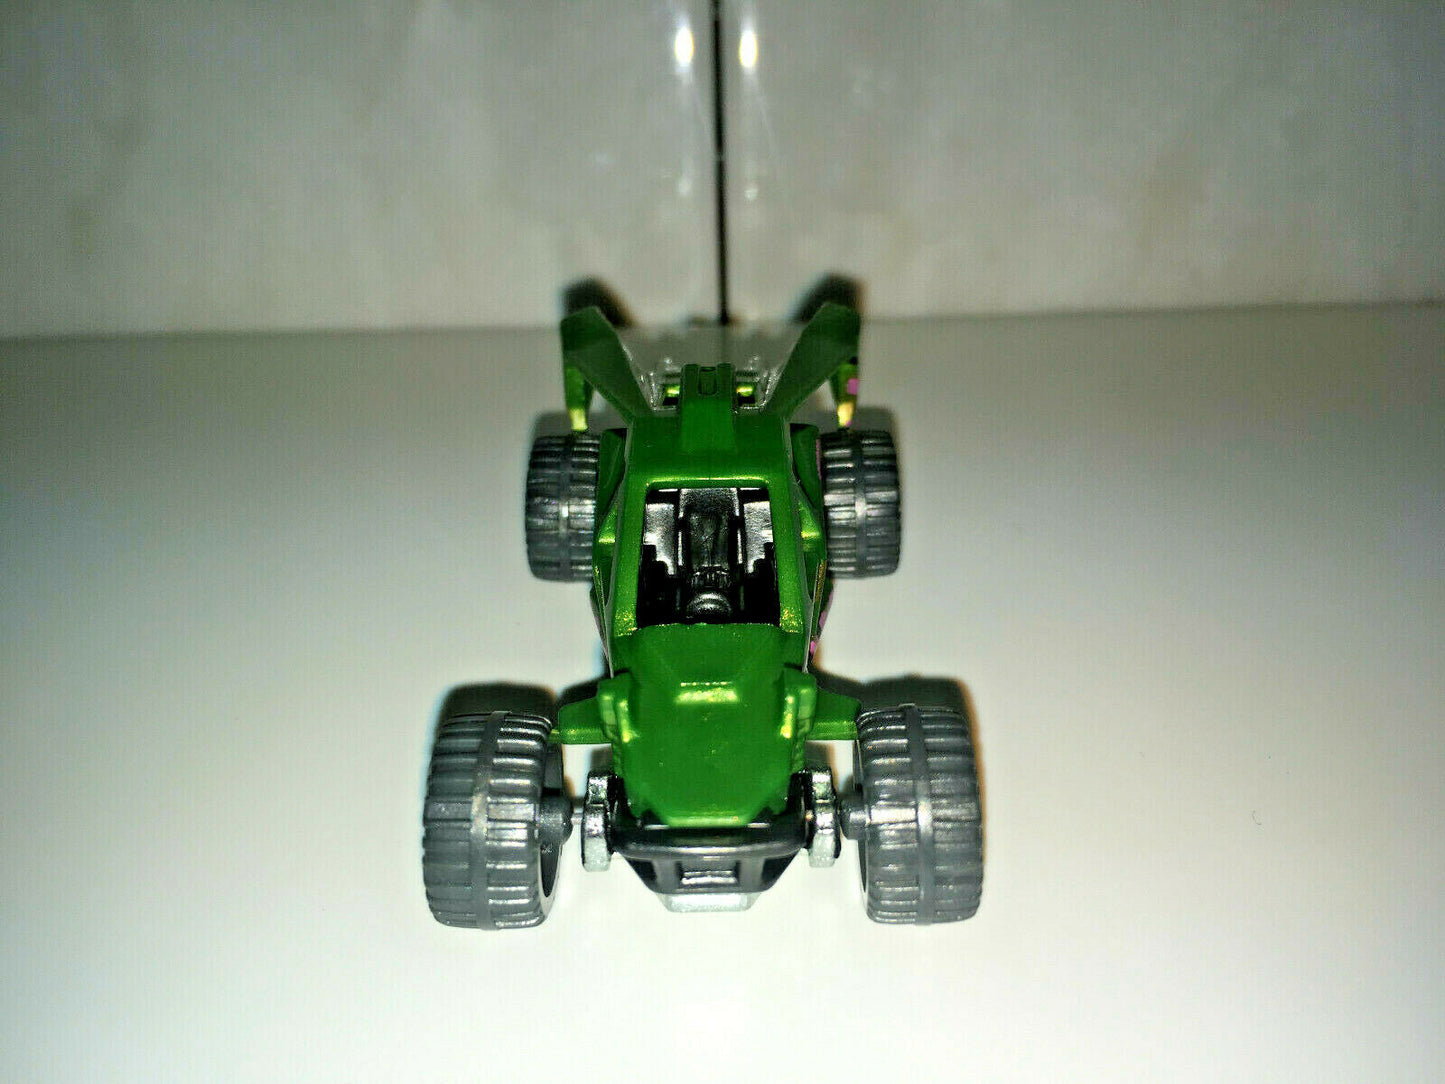 2018 Hot Wheels Loose 2 Pack Exclusive Green HWTF Buggy NEW fresh out of package